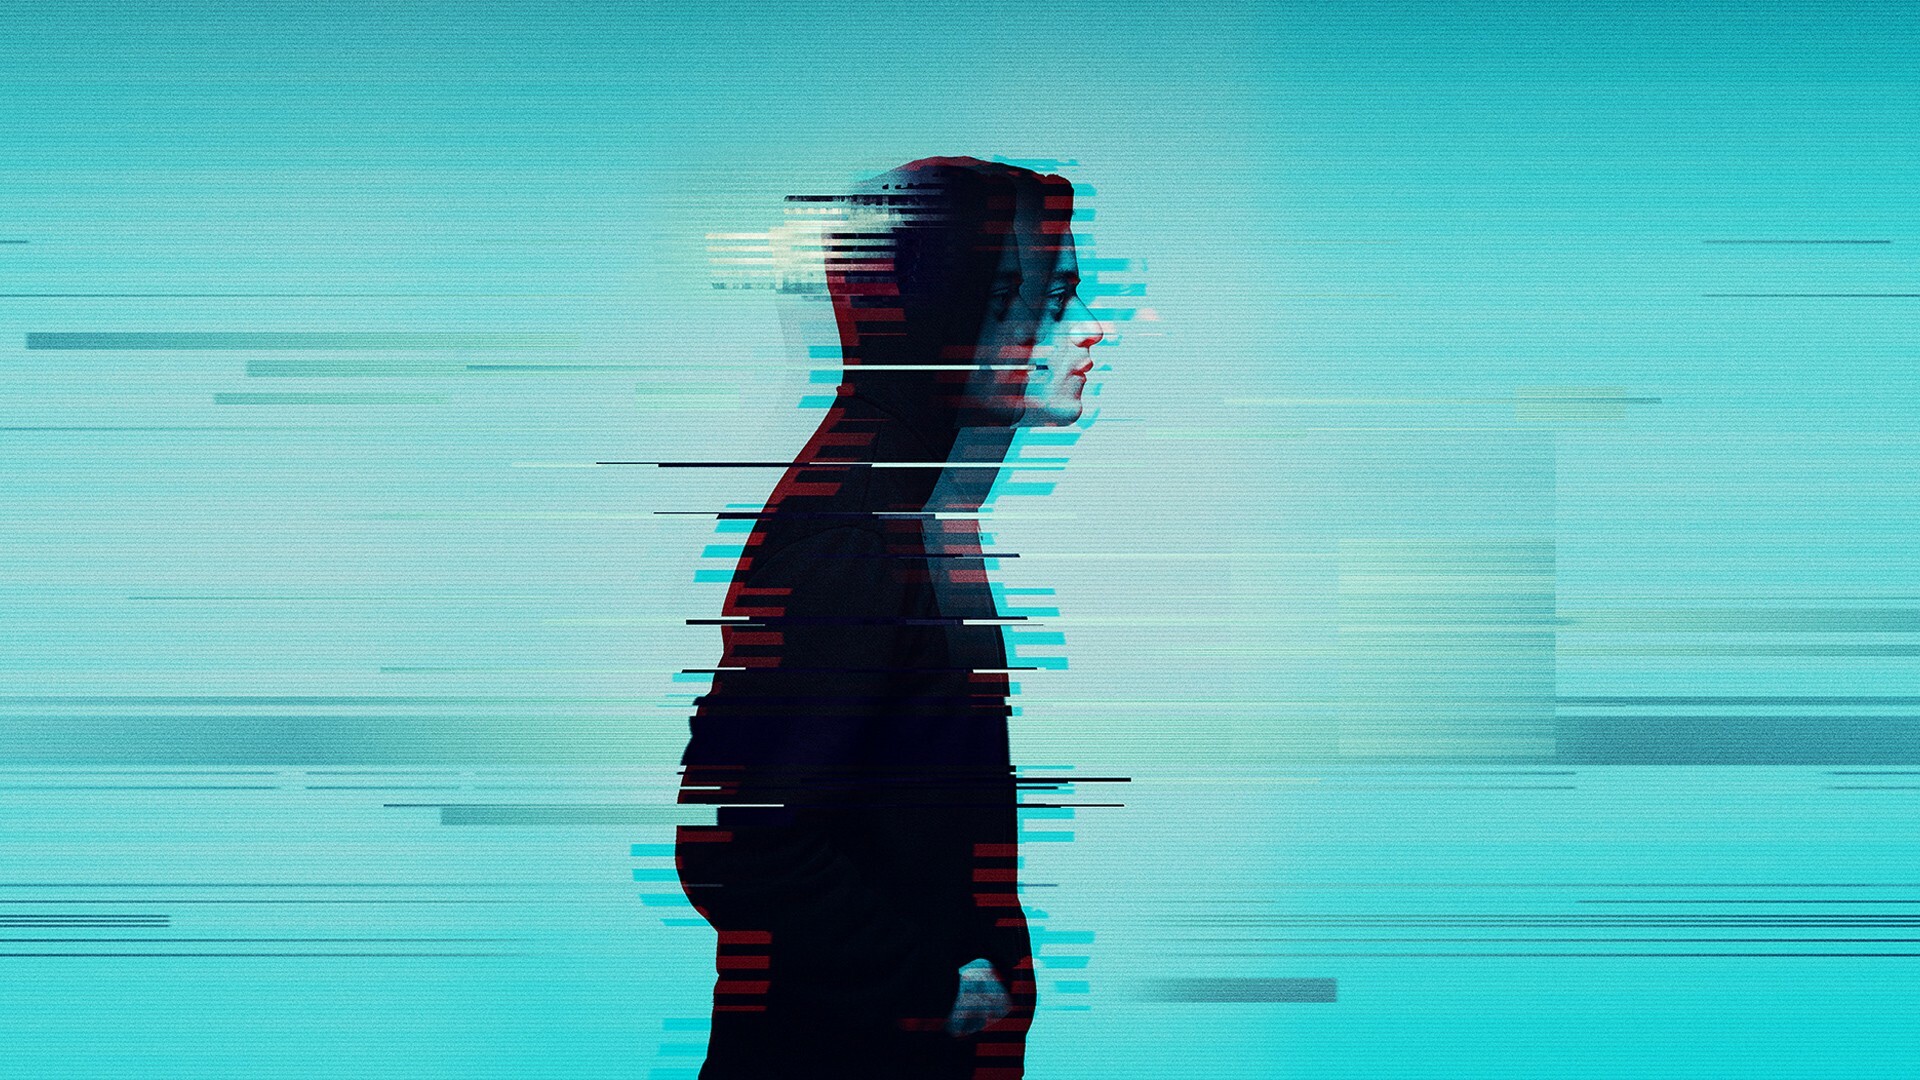 Mr. Robot: The pilot was exhibited at the SXSW and Tribeca Film festivals in 2015. 1920x1080 Full HD Wallpaper.